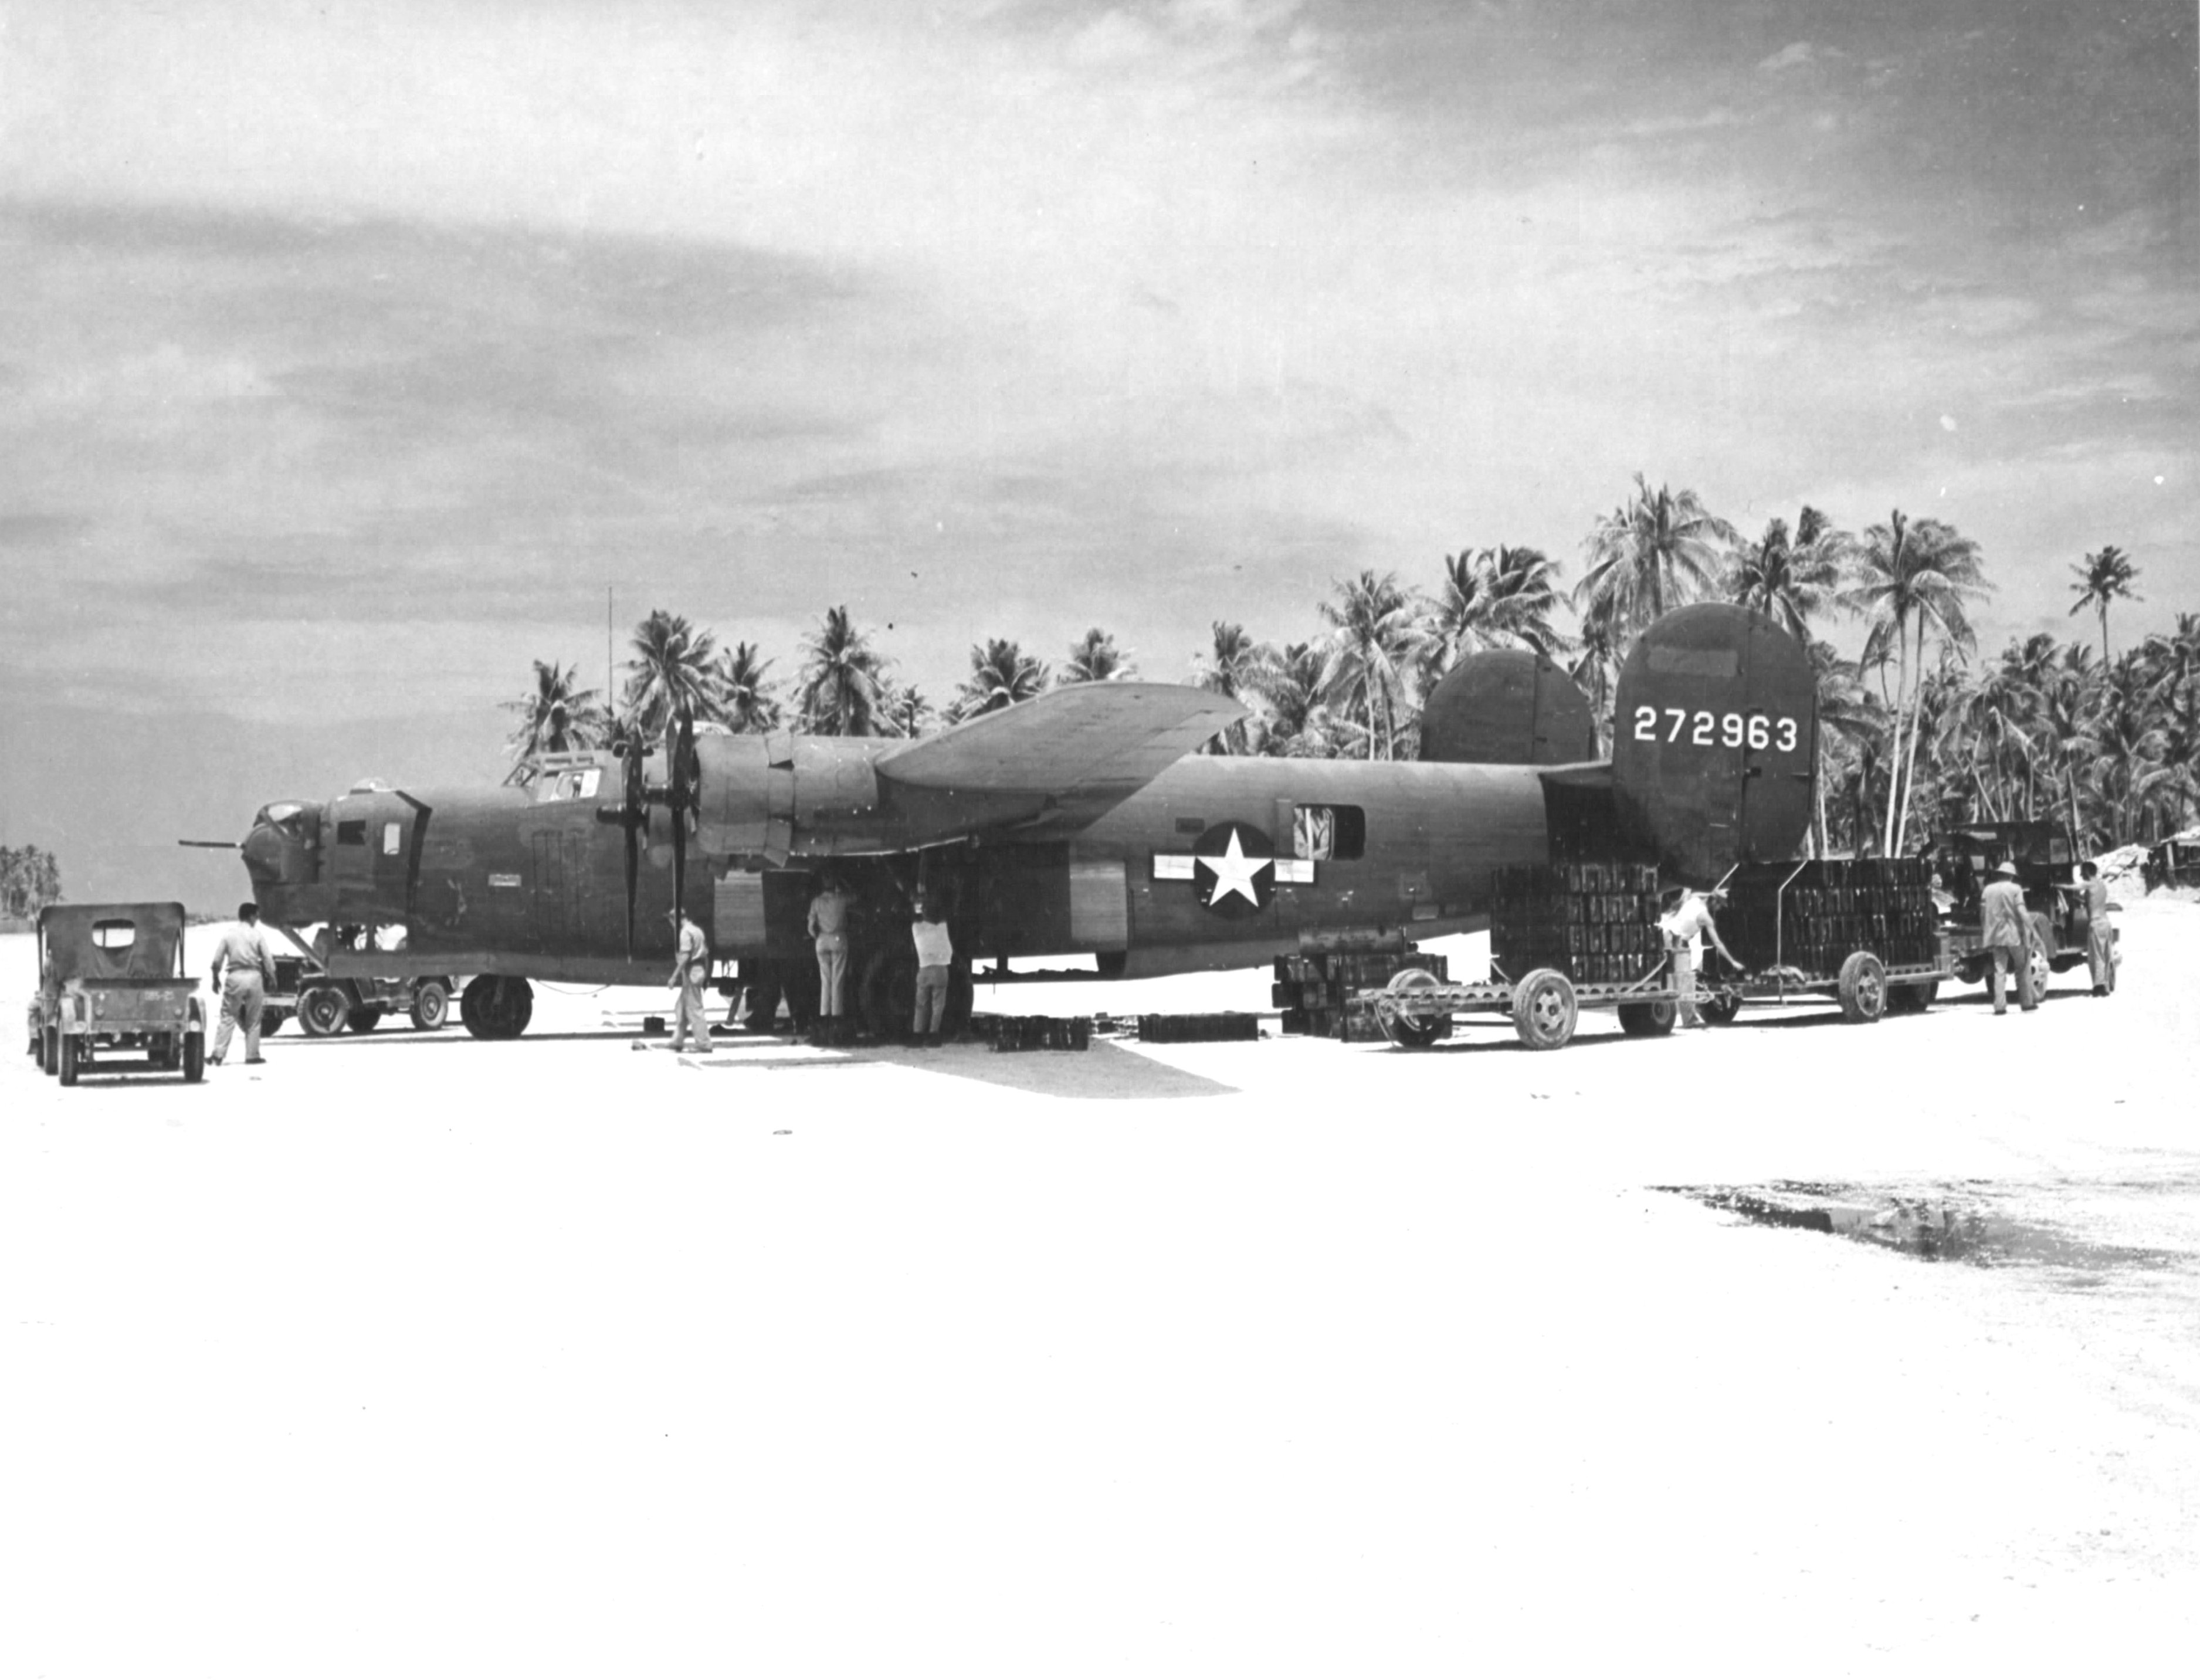 B-24D Liberator of the 42nd Bomb Squadron being loaded with fragmentation bombs at Funafuti, Gilbert and Ellice Islands, Nov 18 1943.